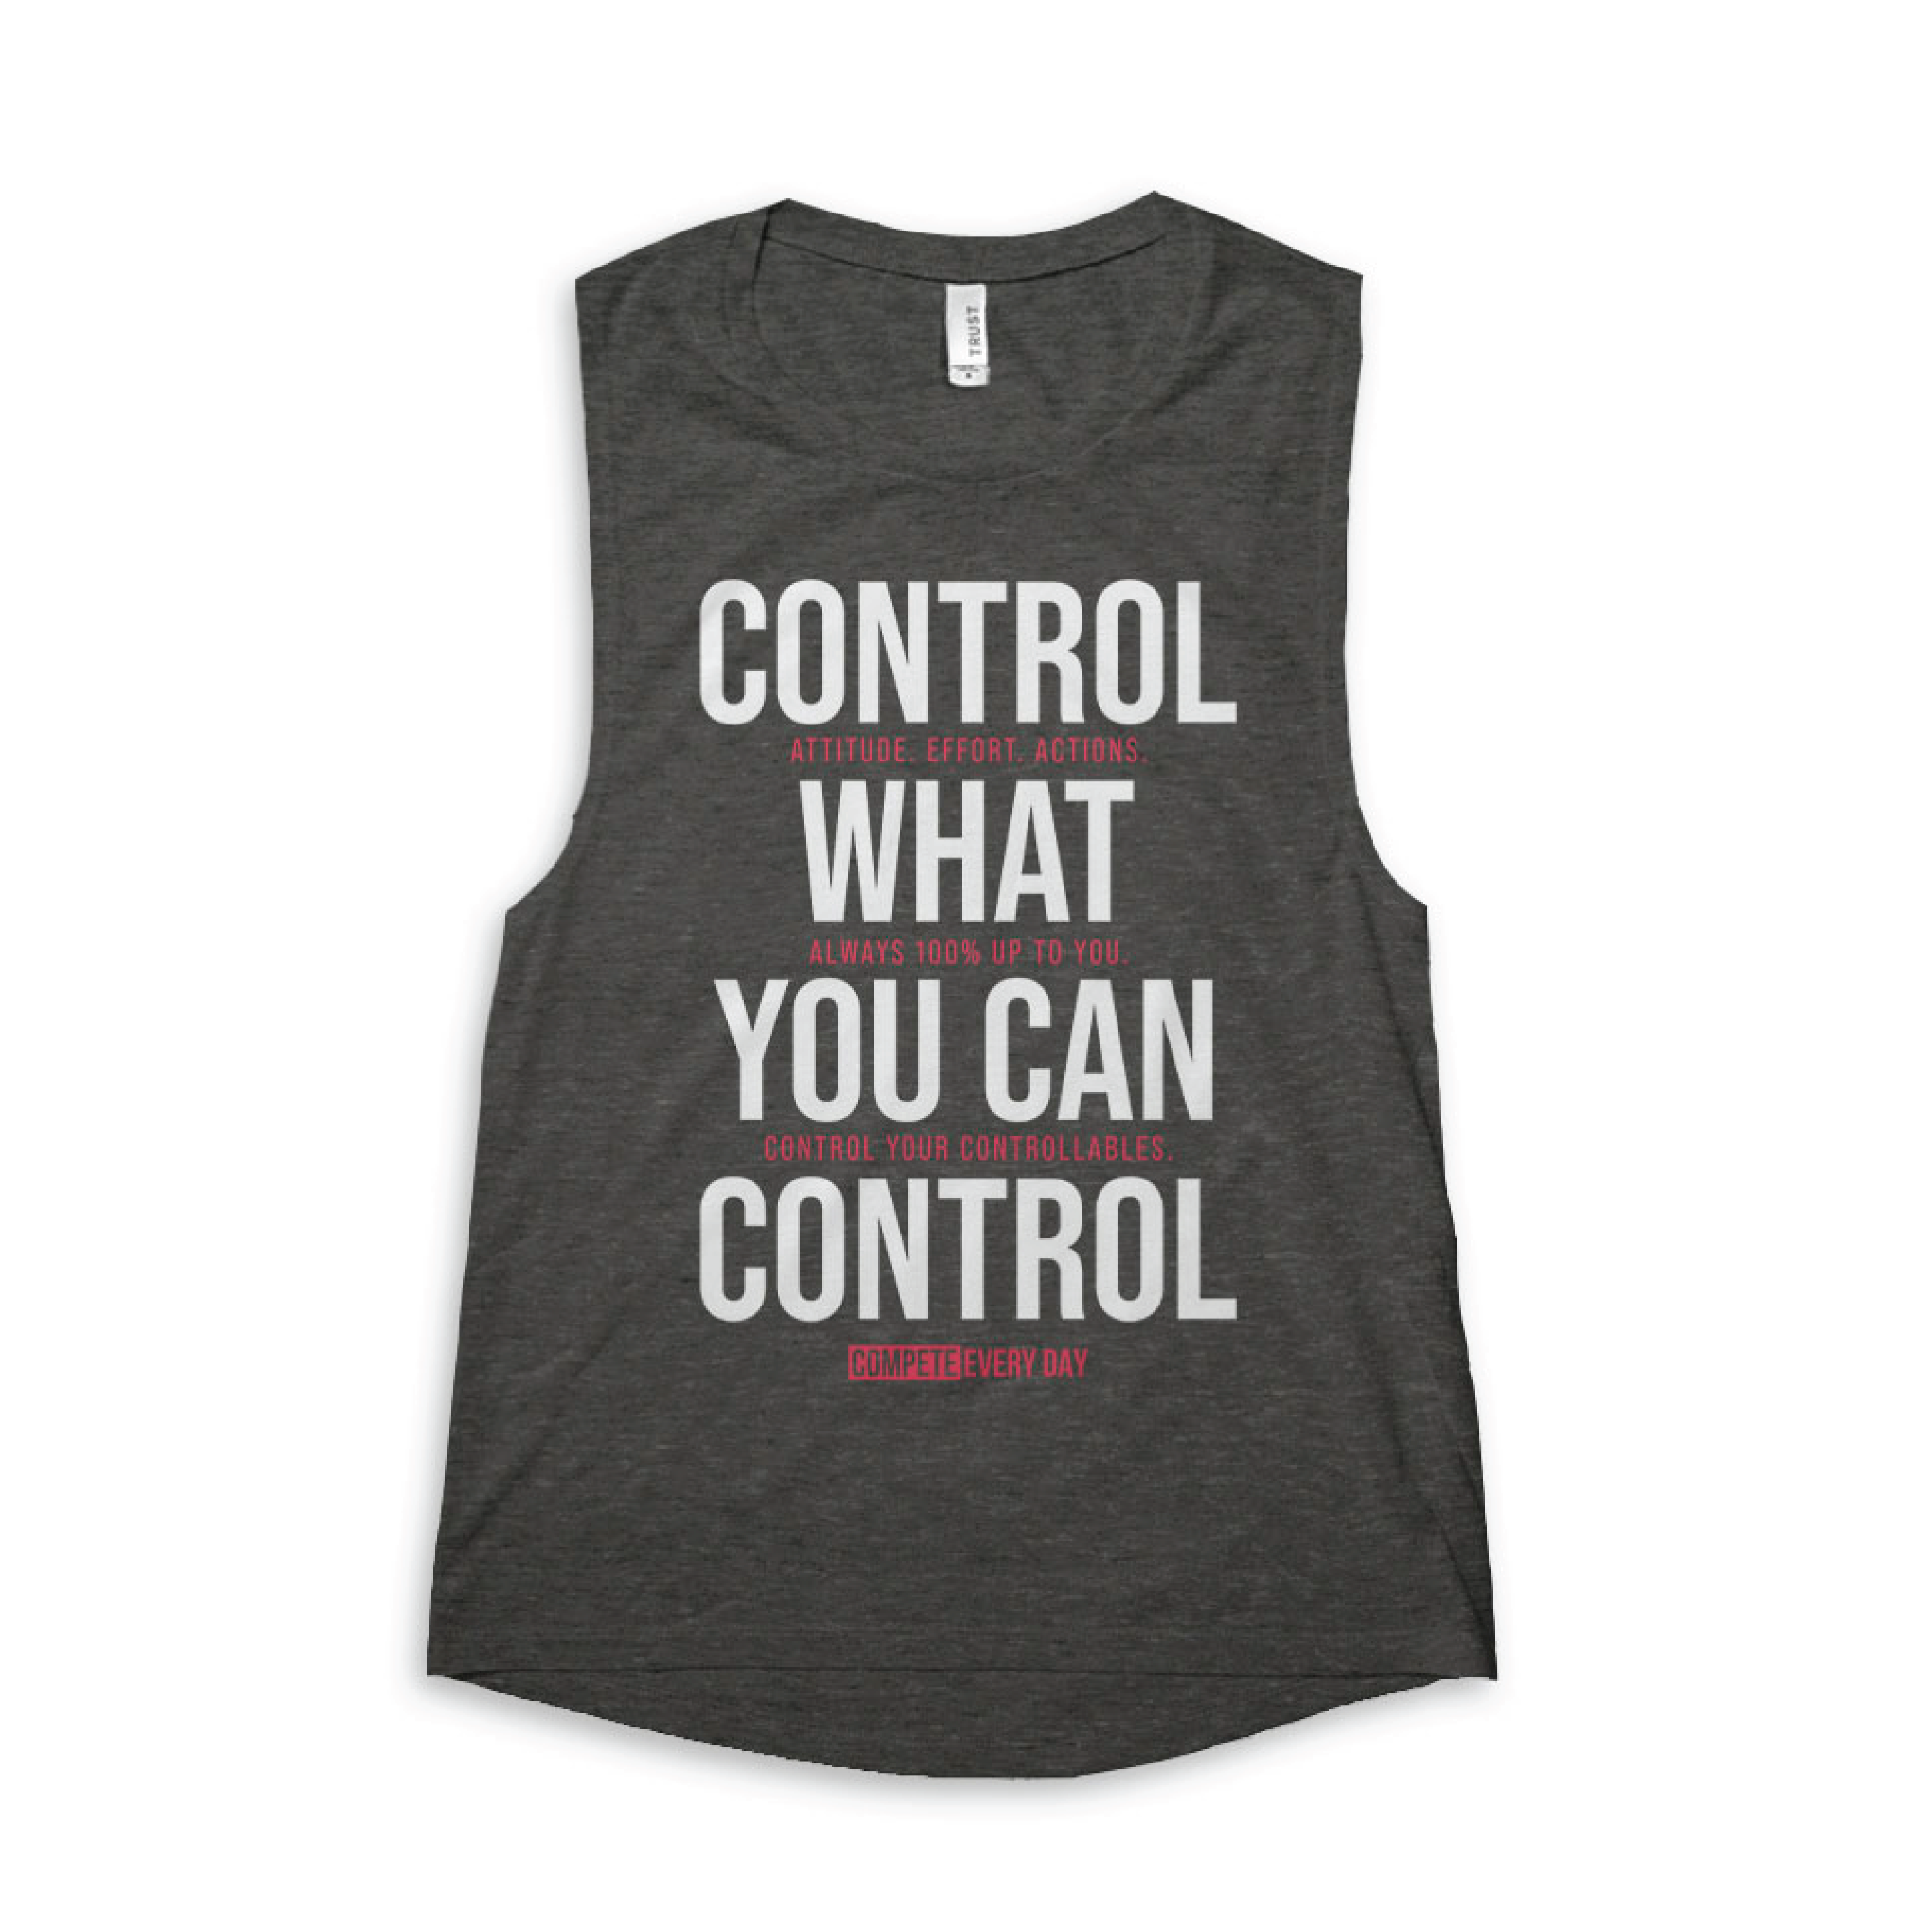 Control the Controllables (Small, XL)